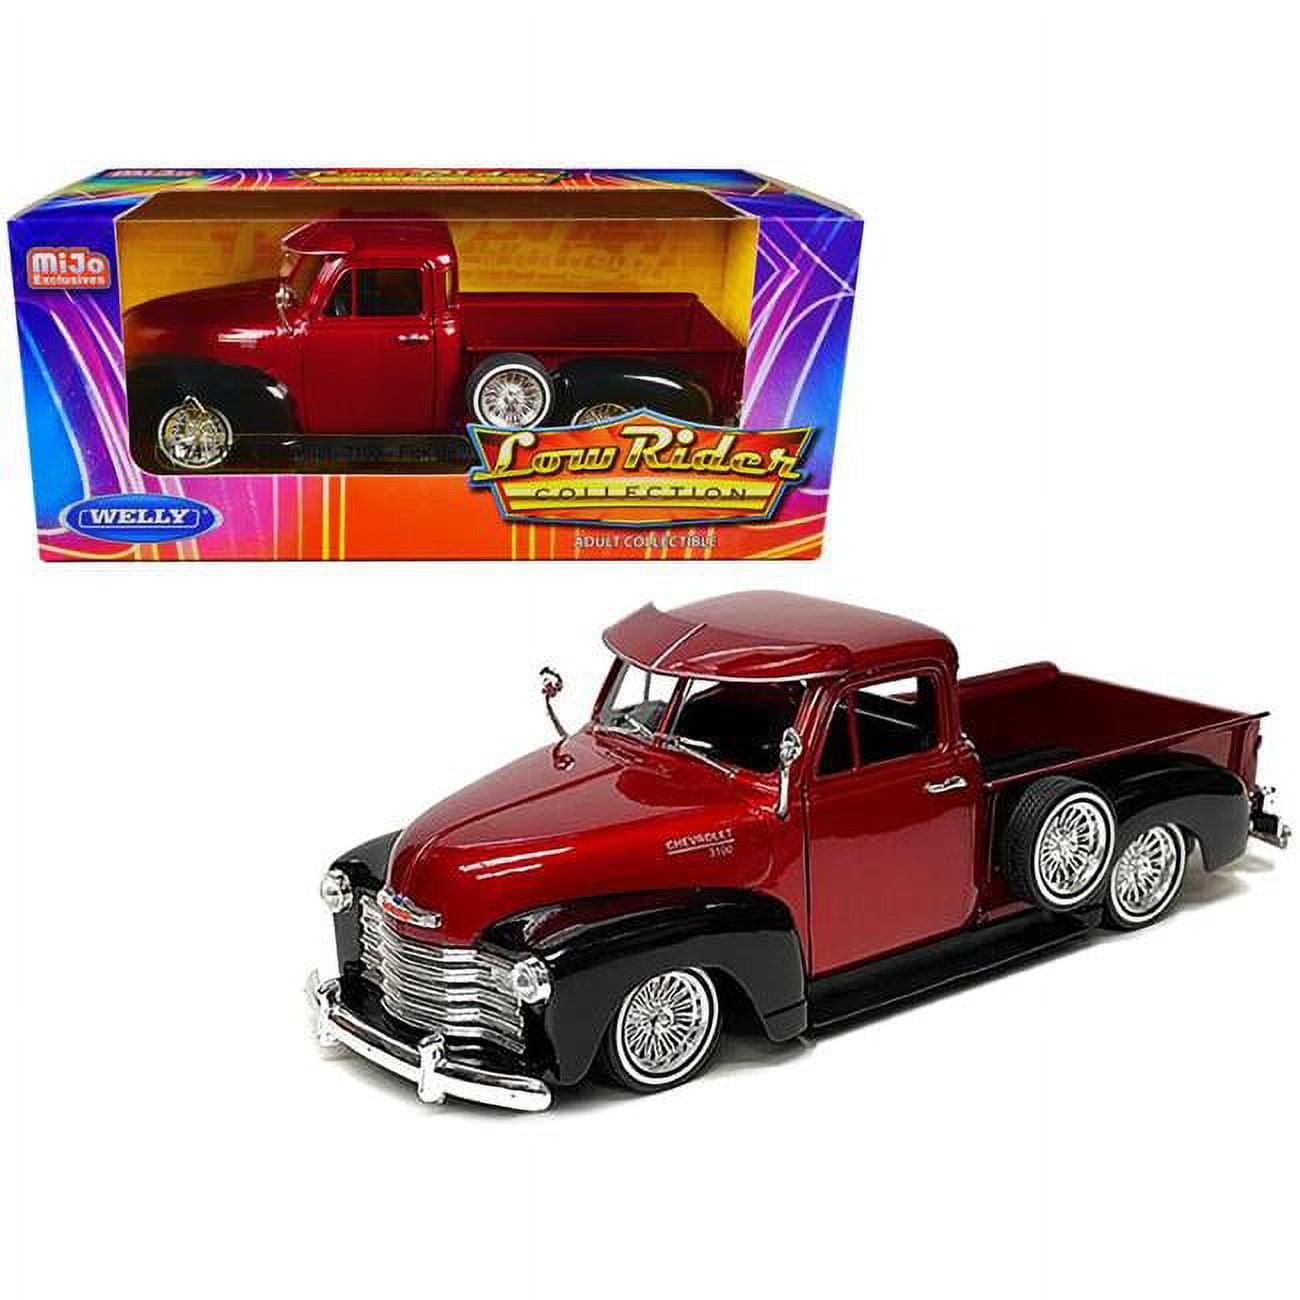 22087LRW-MRD 1953 Chevrolet 3100 Pickup Truck Lowrider Red Metallic & Black Two-Tone Low Rider Collection 1-24 Diecast Model Car -  WELLY